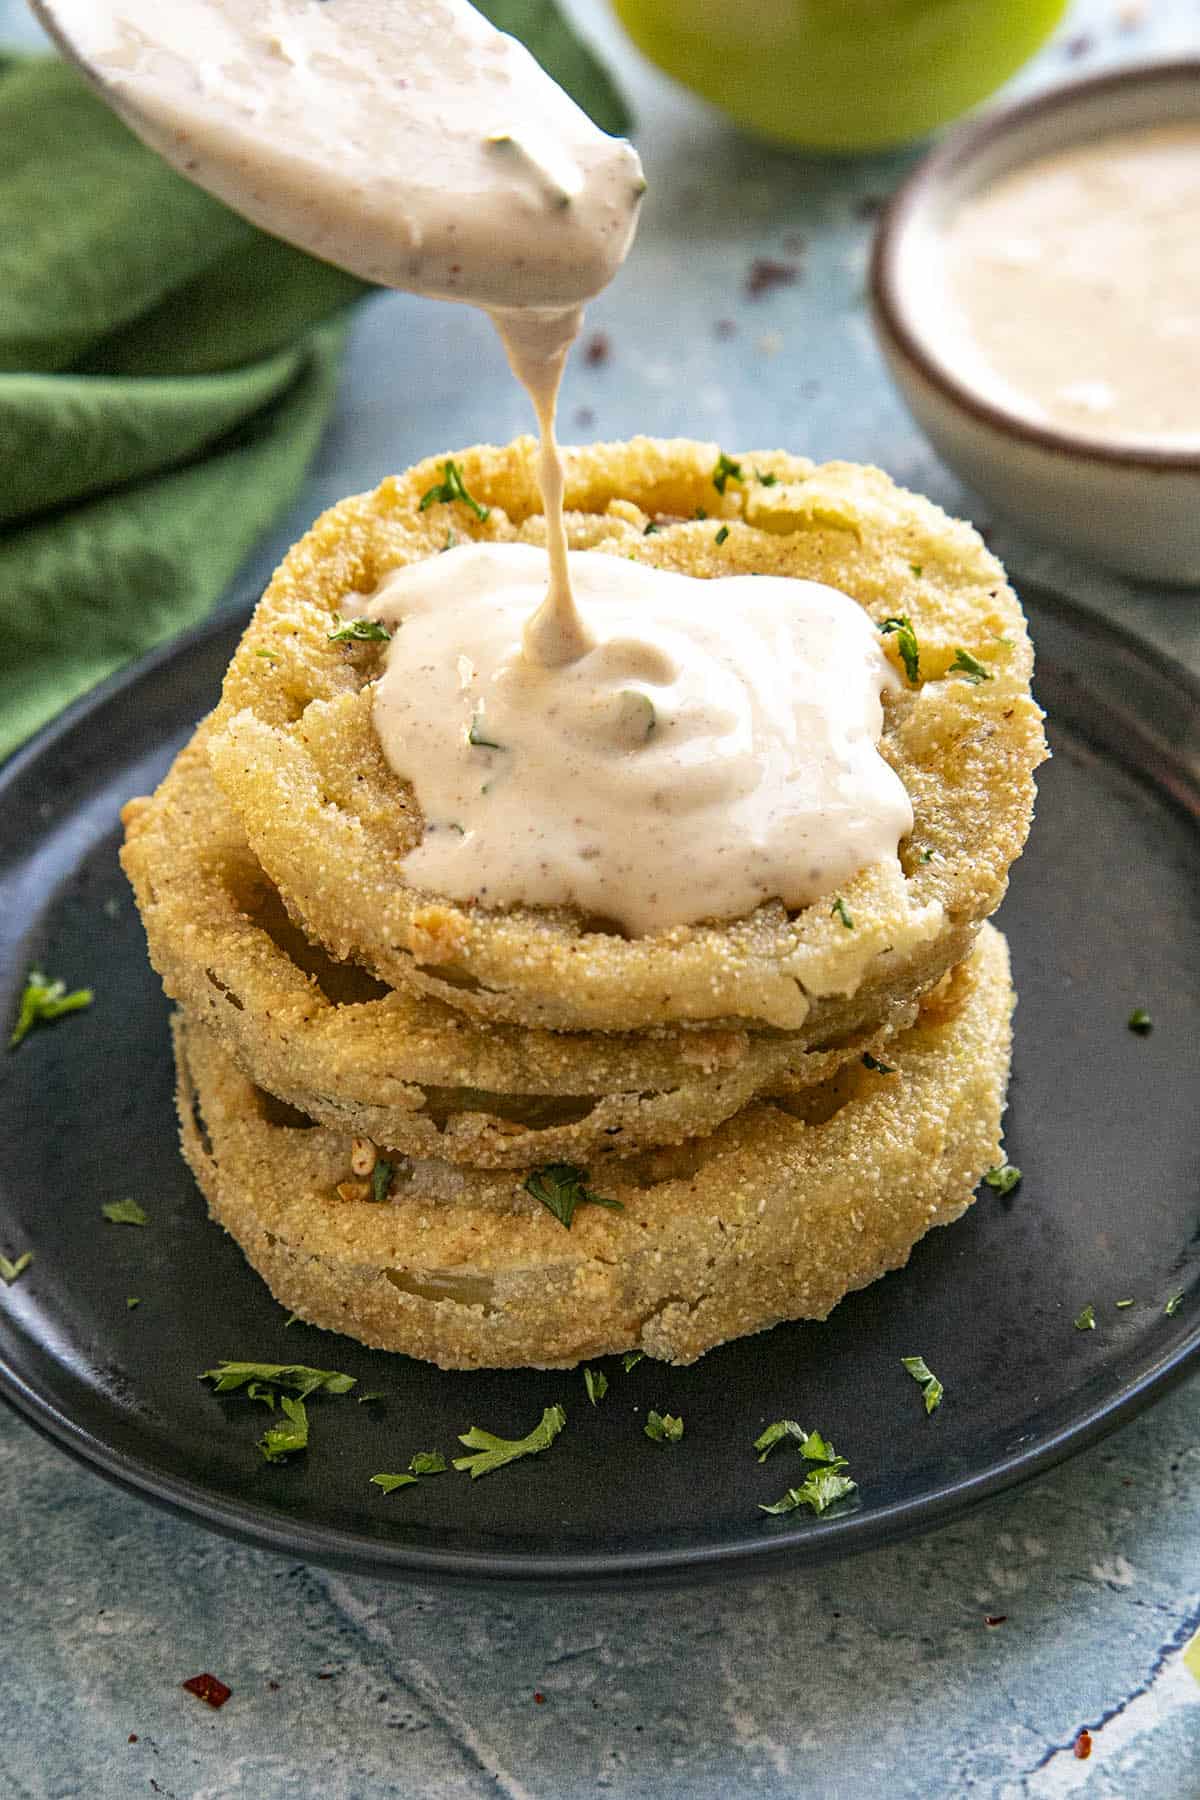 Drizzling creamy remoulade over Fried Green Tomatoes